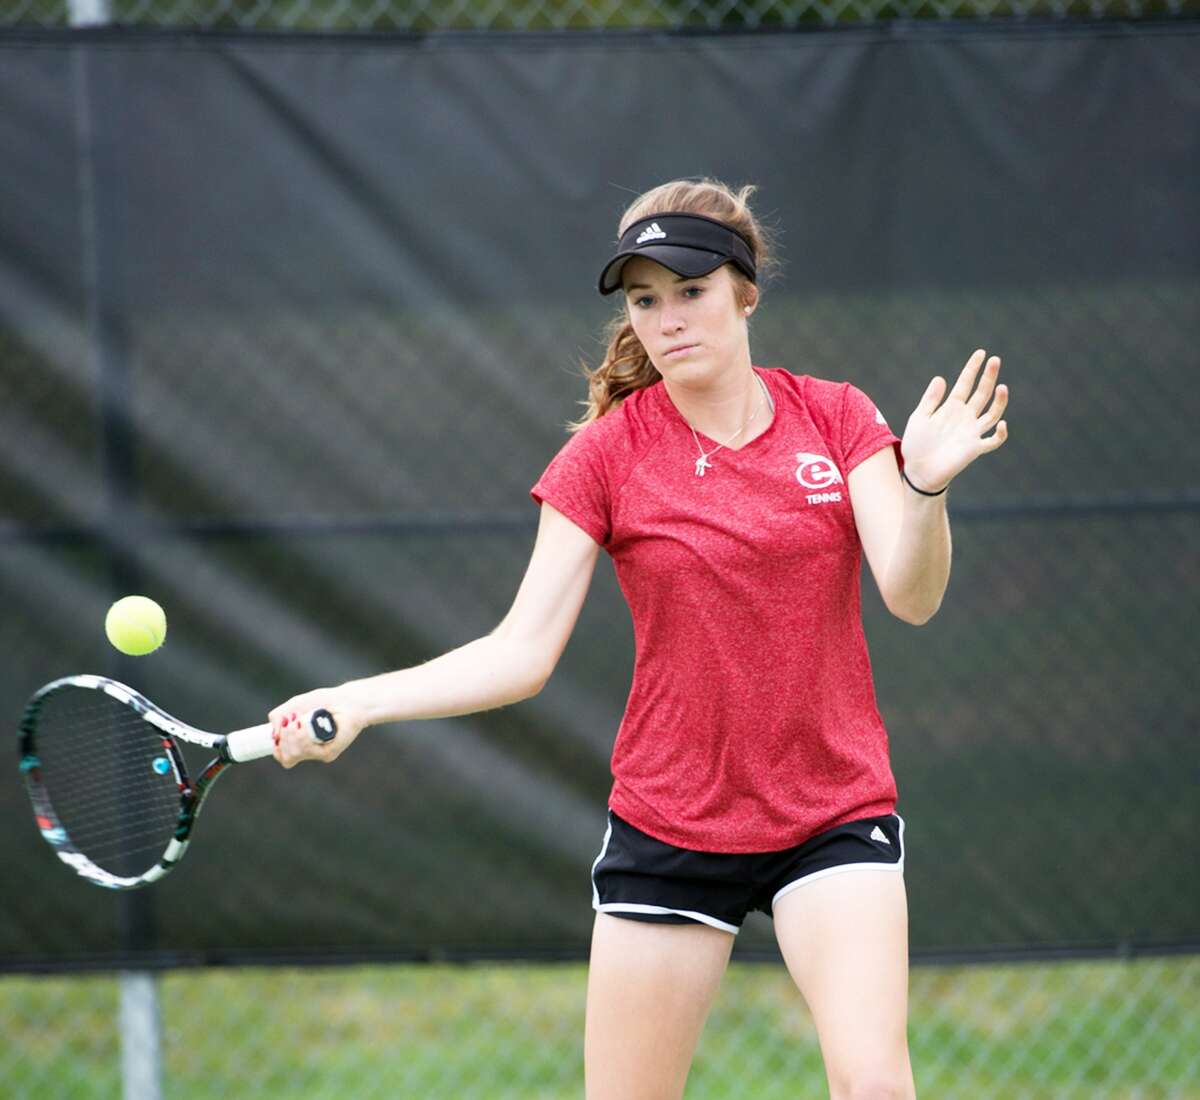 SIUE freshman Callaghan Adams hits a return shot. Adams is 16-11 in singles and 8-13 in doubles in her first season with the Cougars.